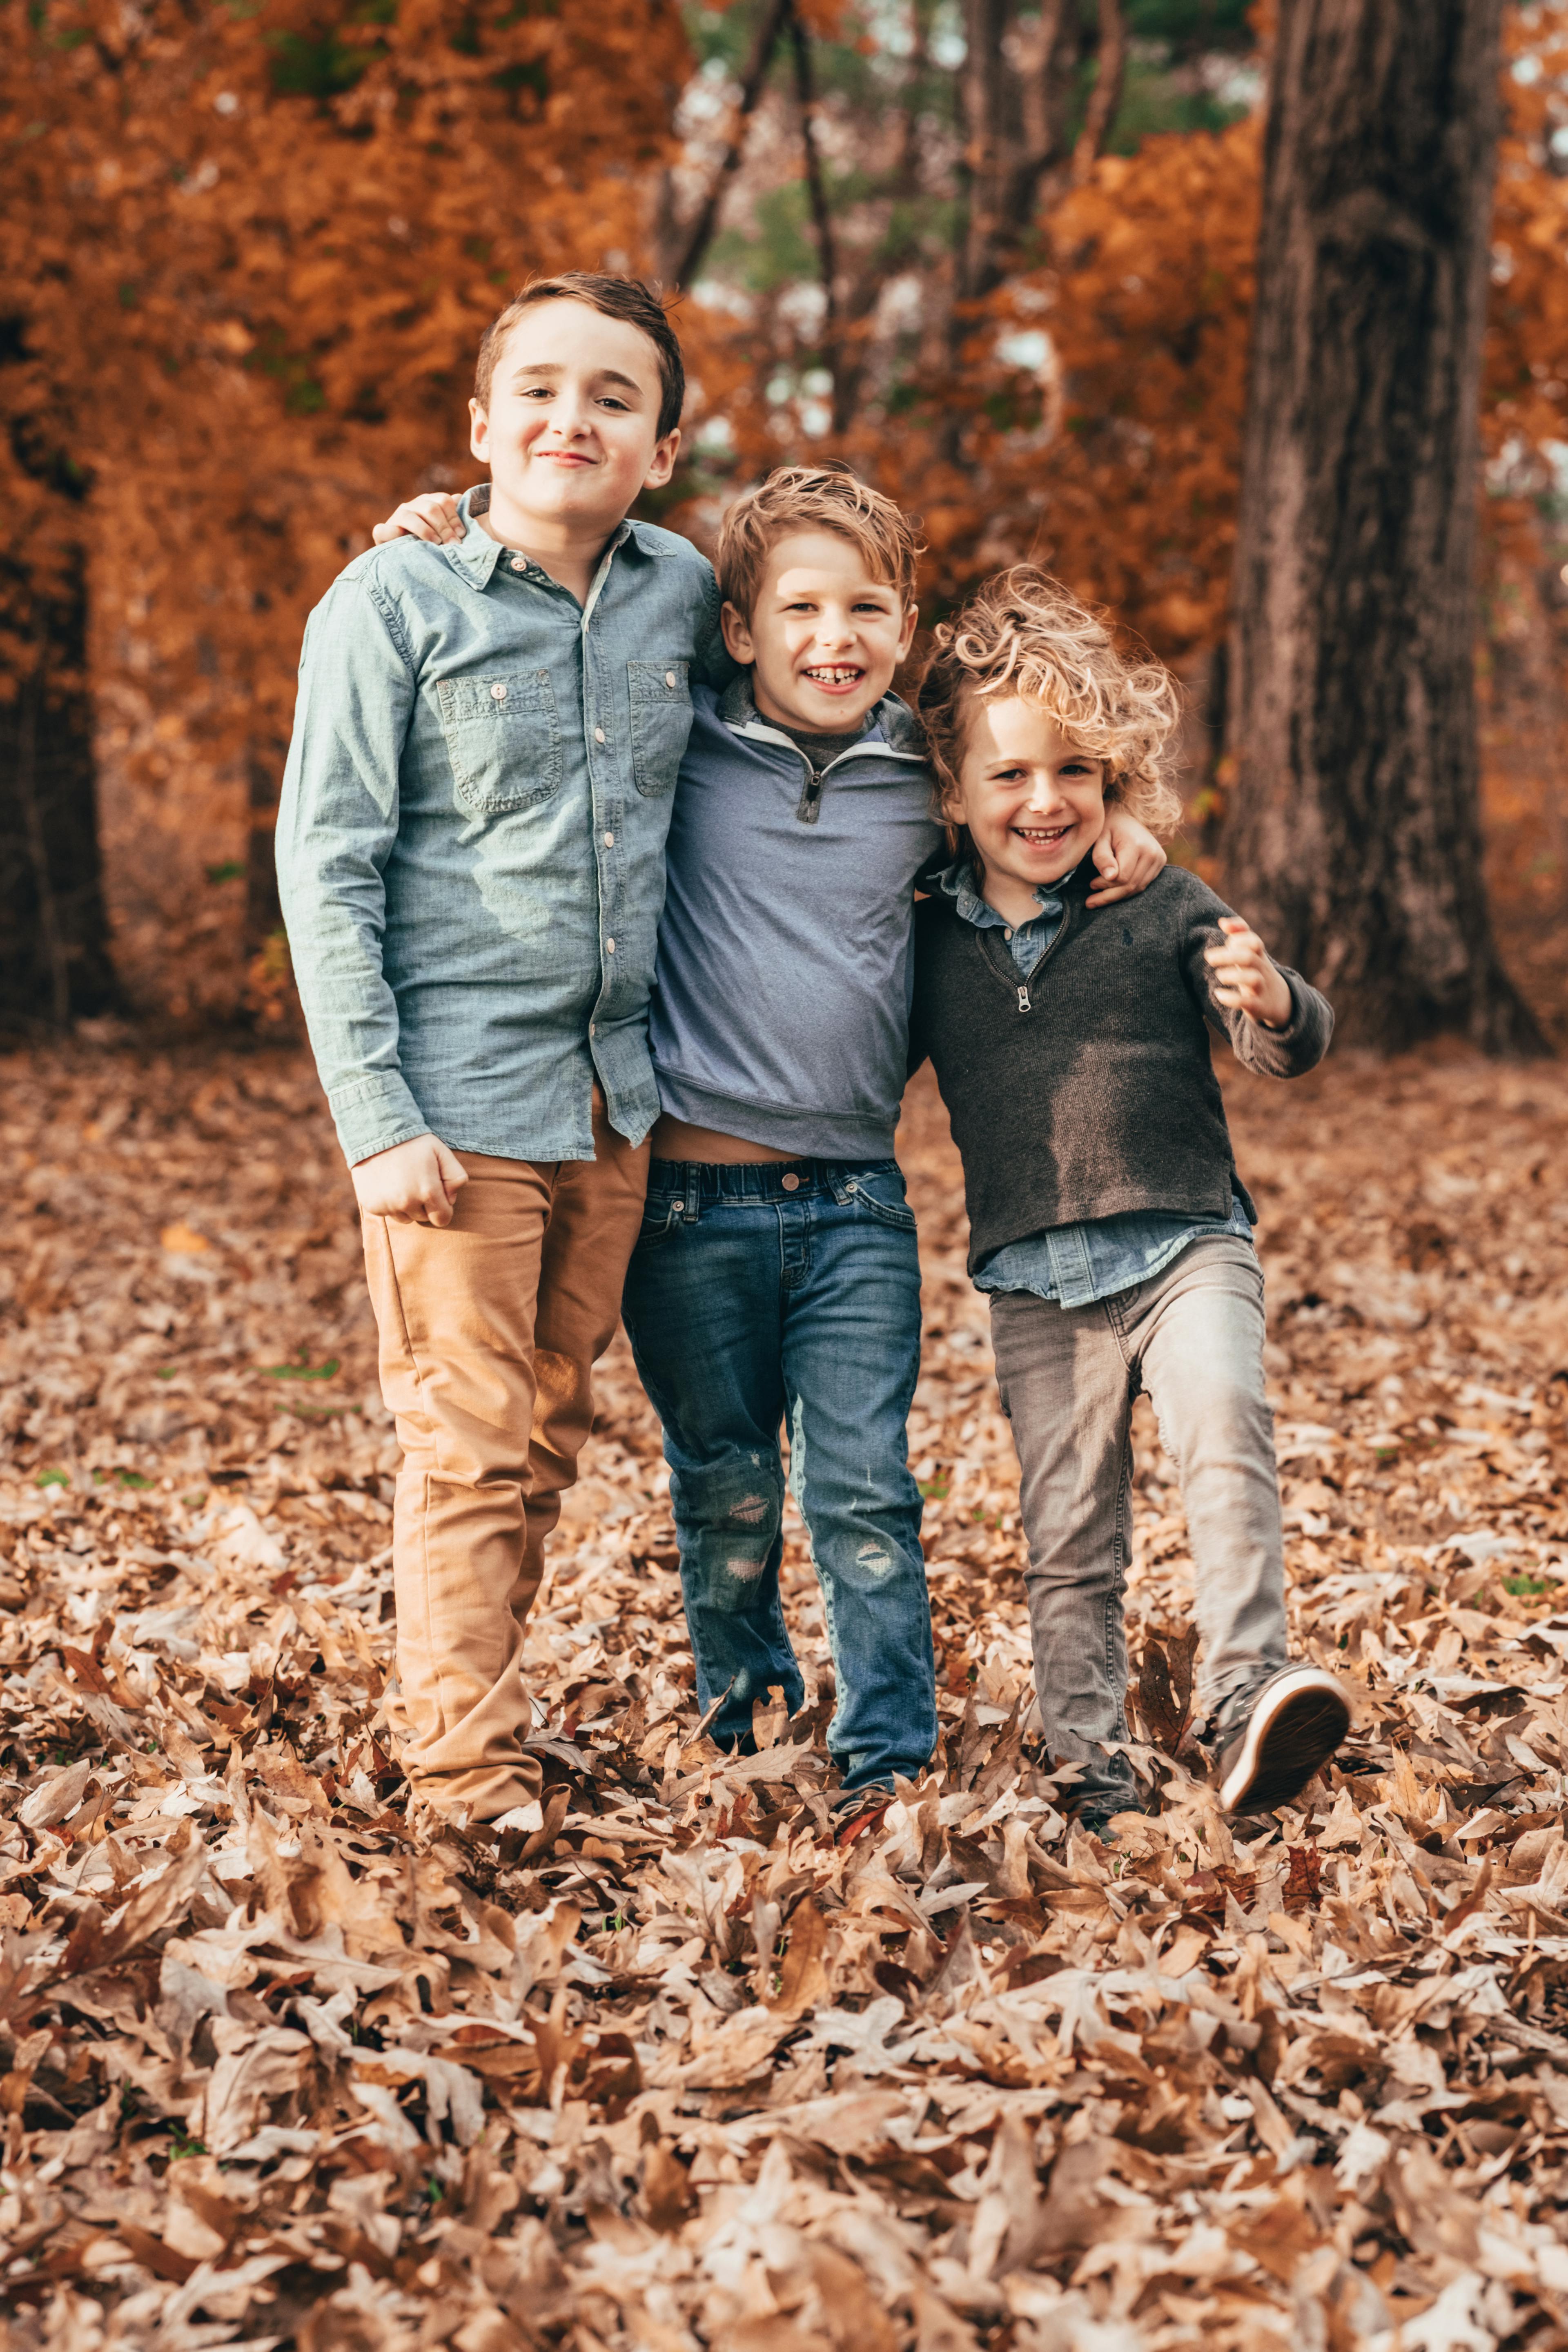 Three boys hugging and smiling among fallen leaves in an autumn setting.